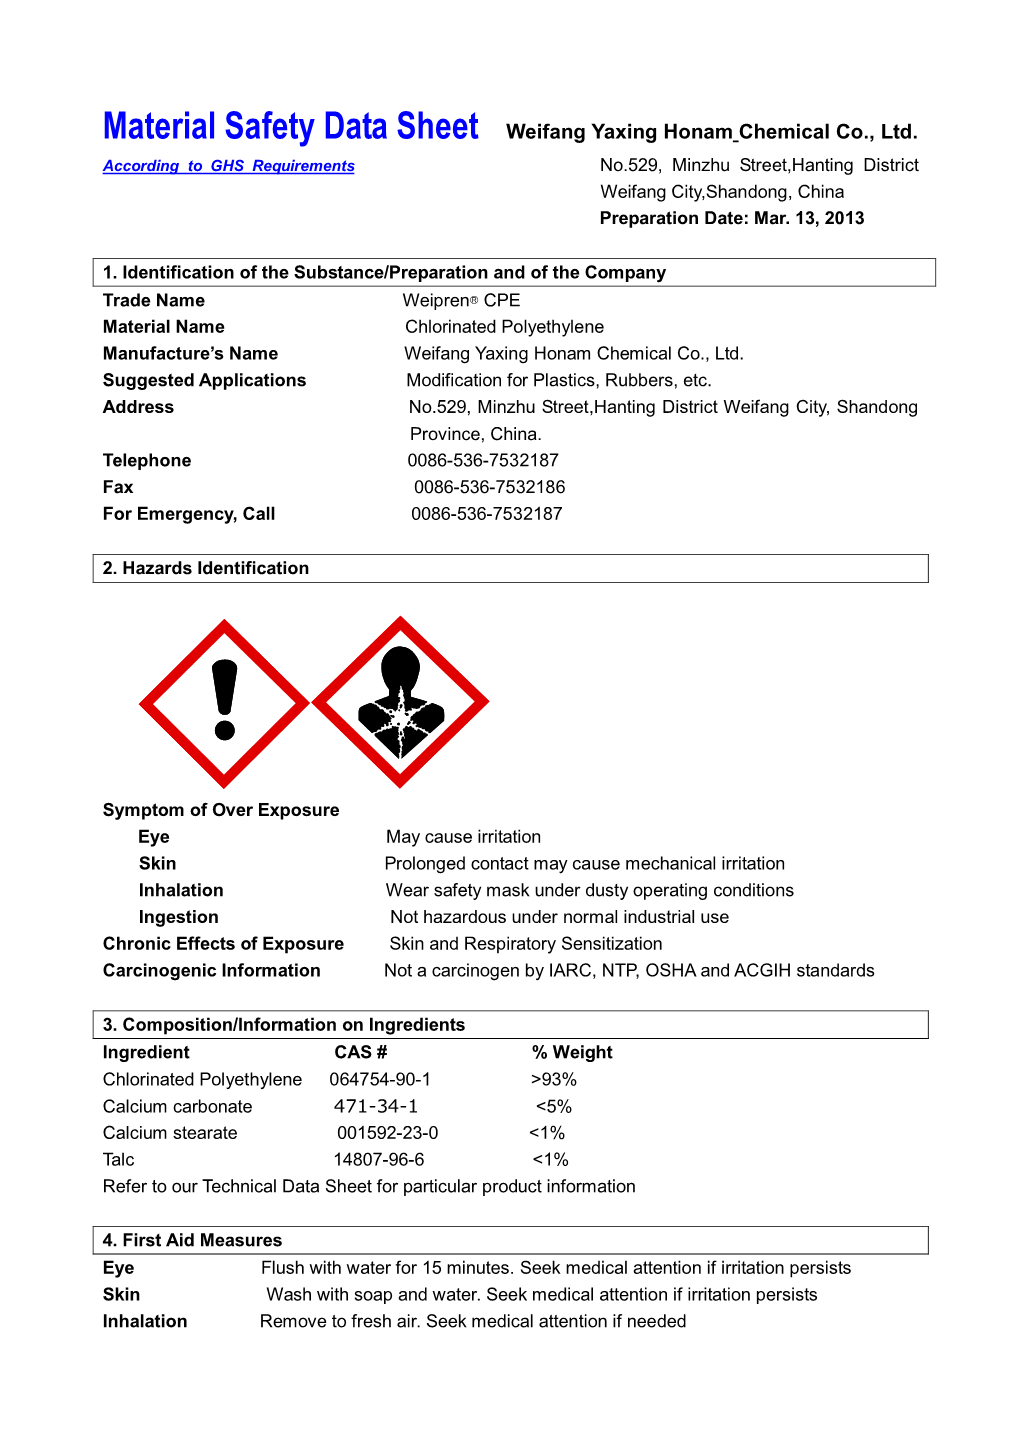 Material Safety Data Sheet Weifang Yaxing Honam Chemical Co., Ltd